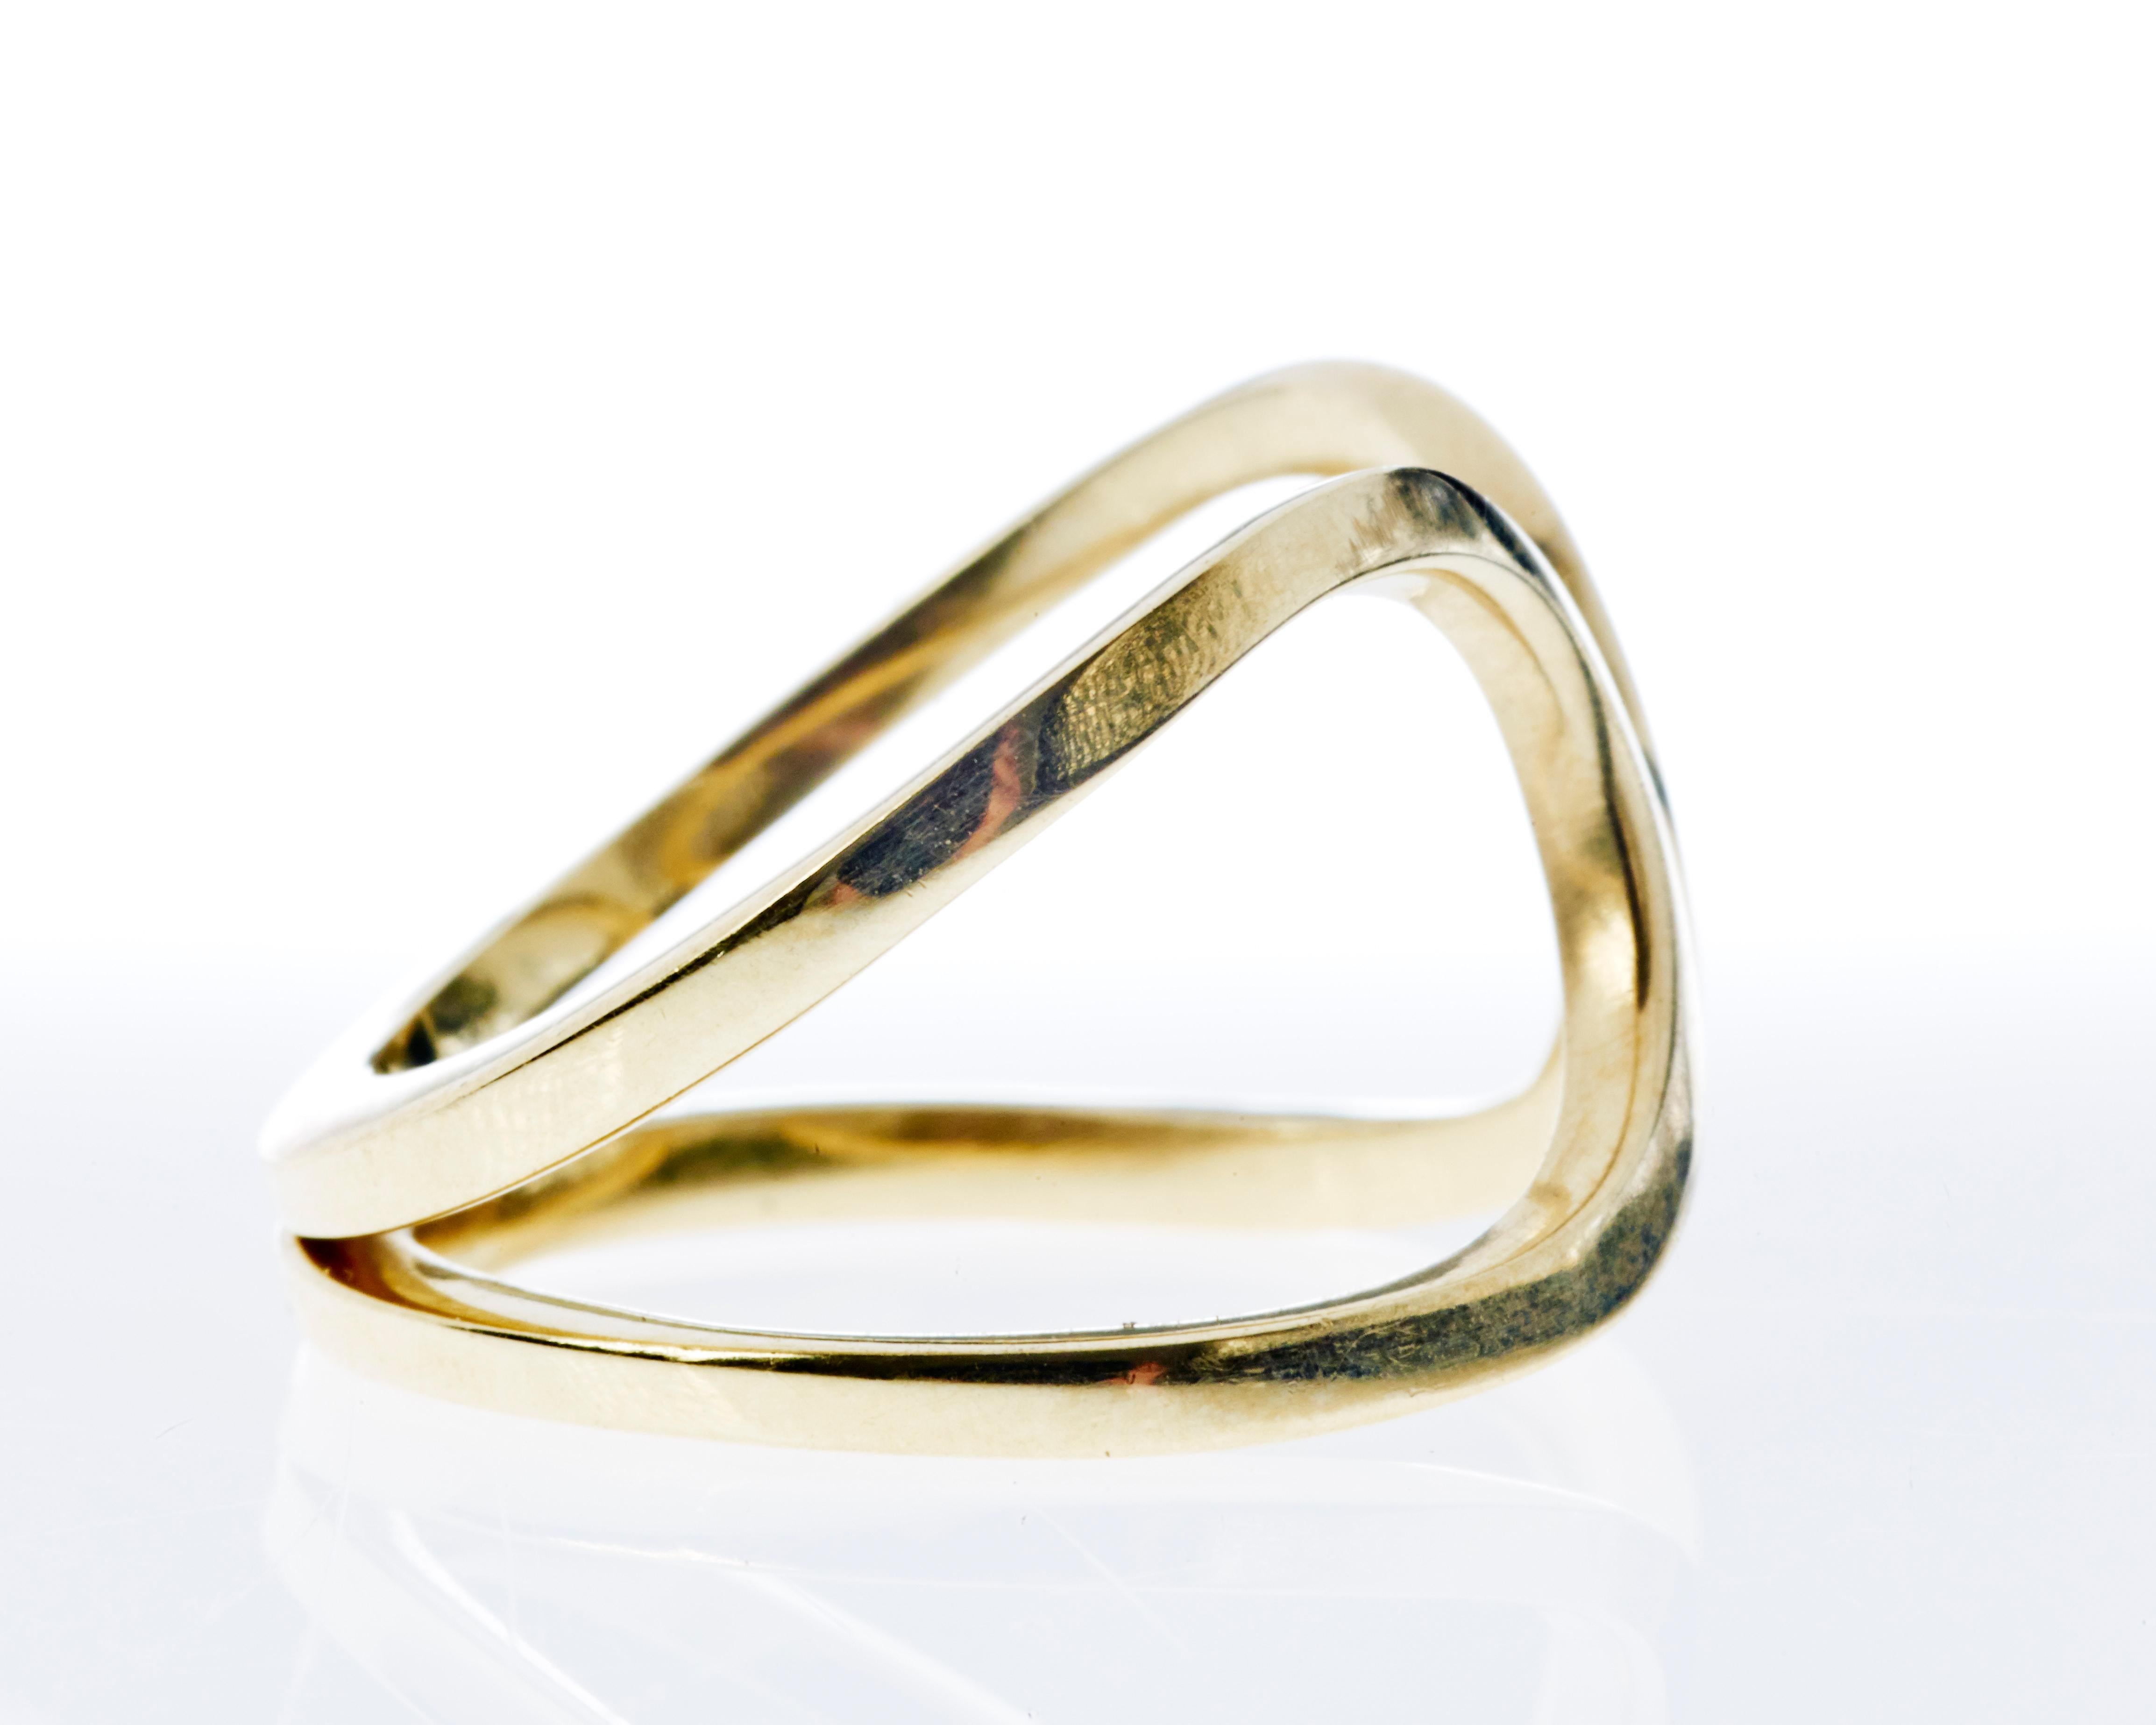 Double Band Ring Gold Adjustable J Dauphin

J DAUPHIN 